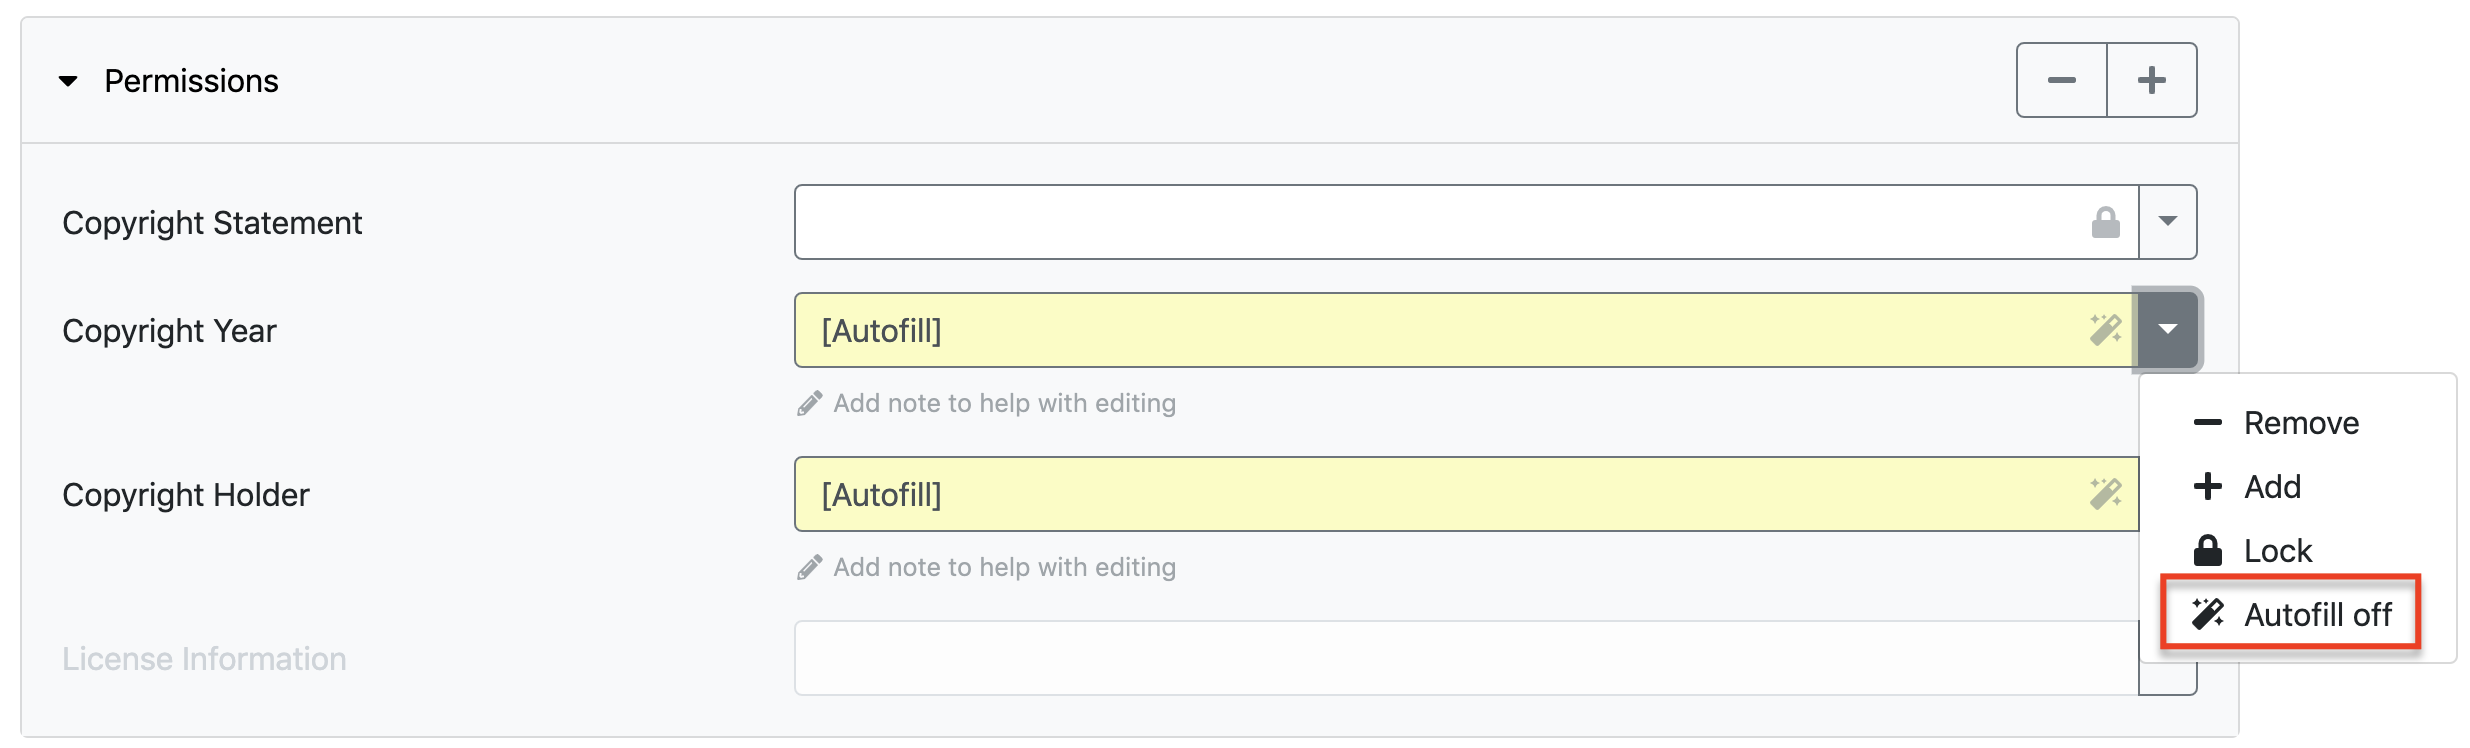 Screenshot of selecting the dropdown arrow icon next to the metadata field and selecting Autofill off